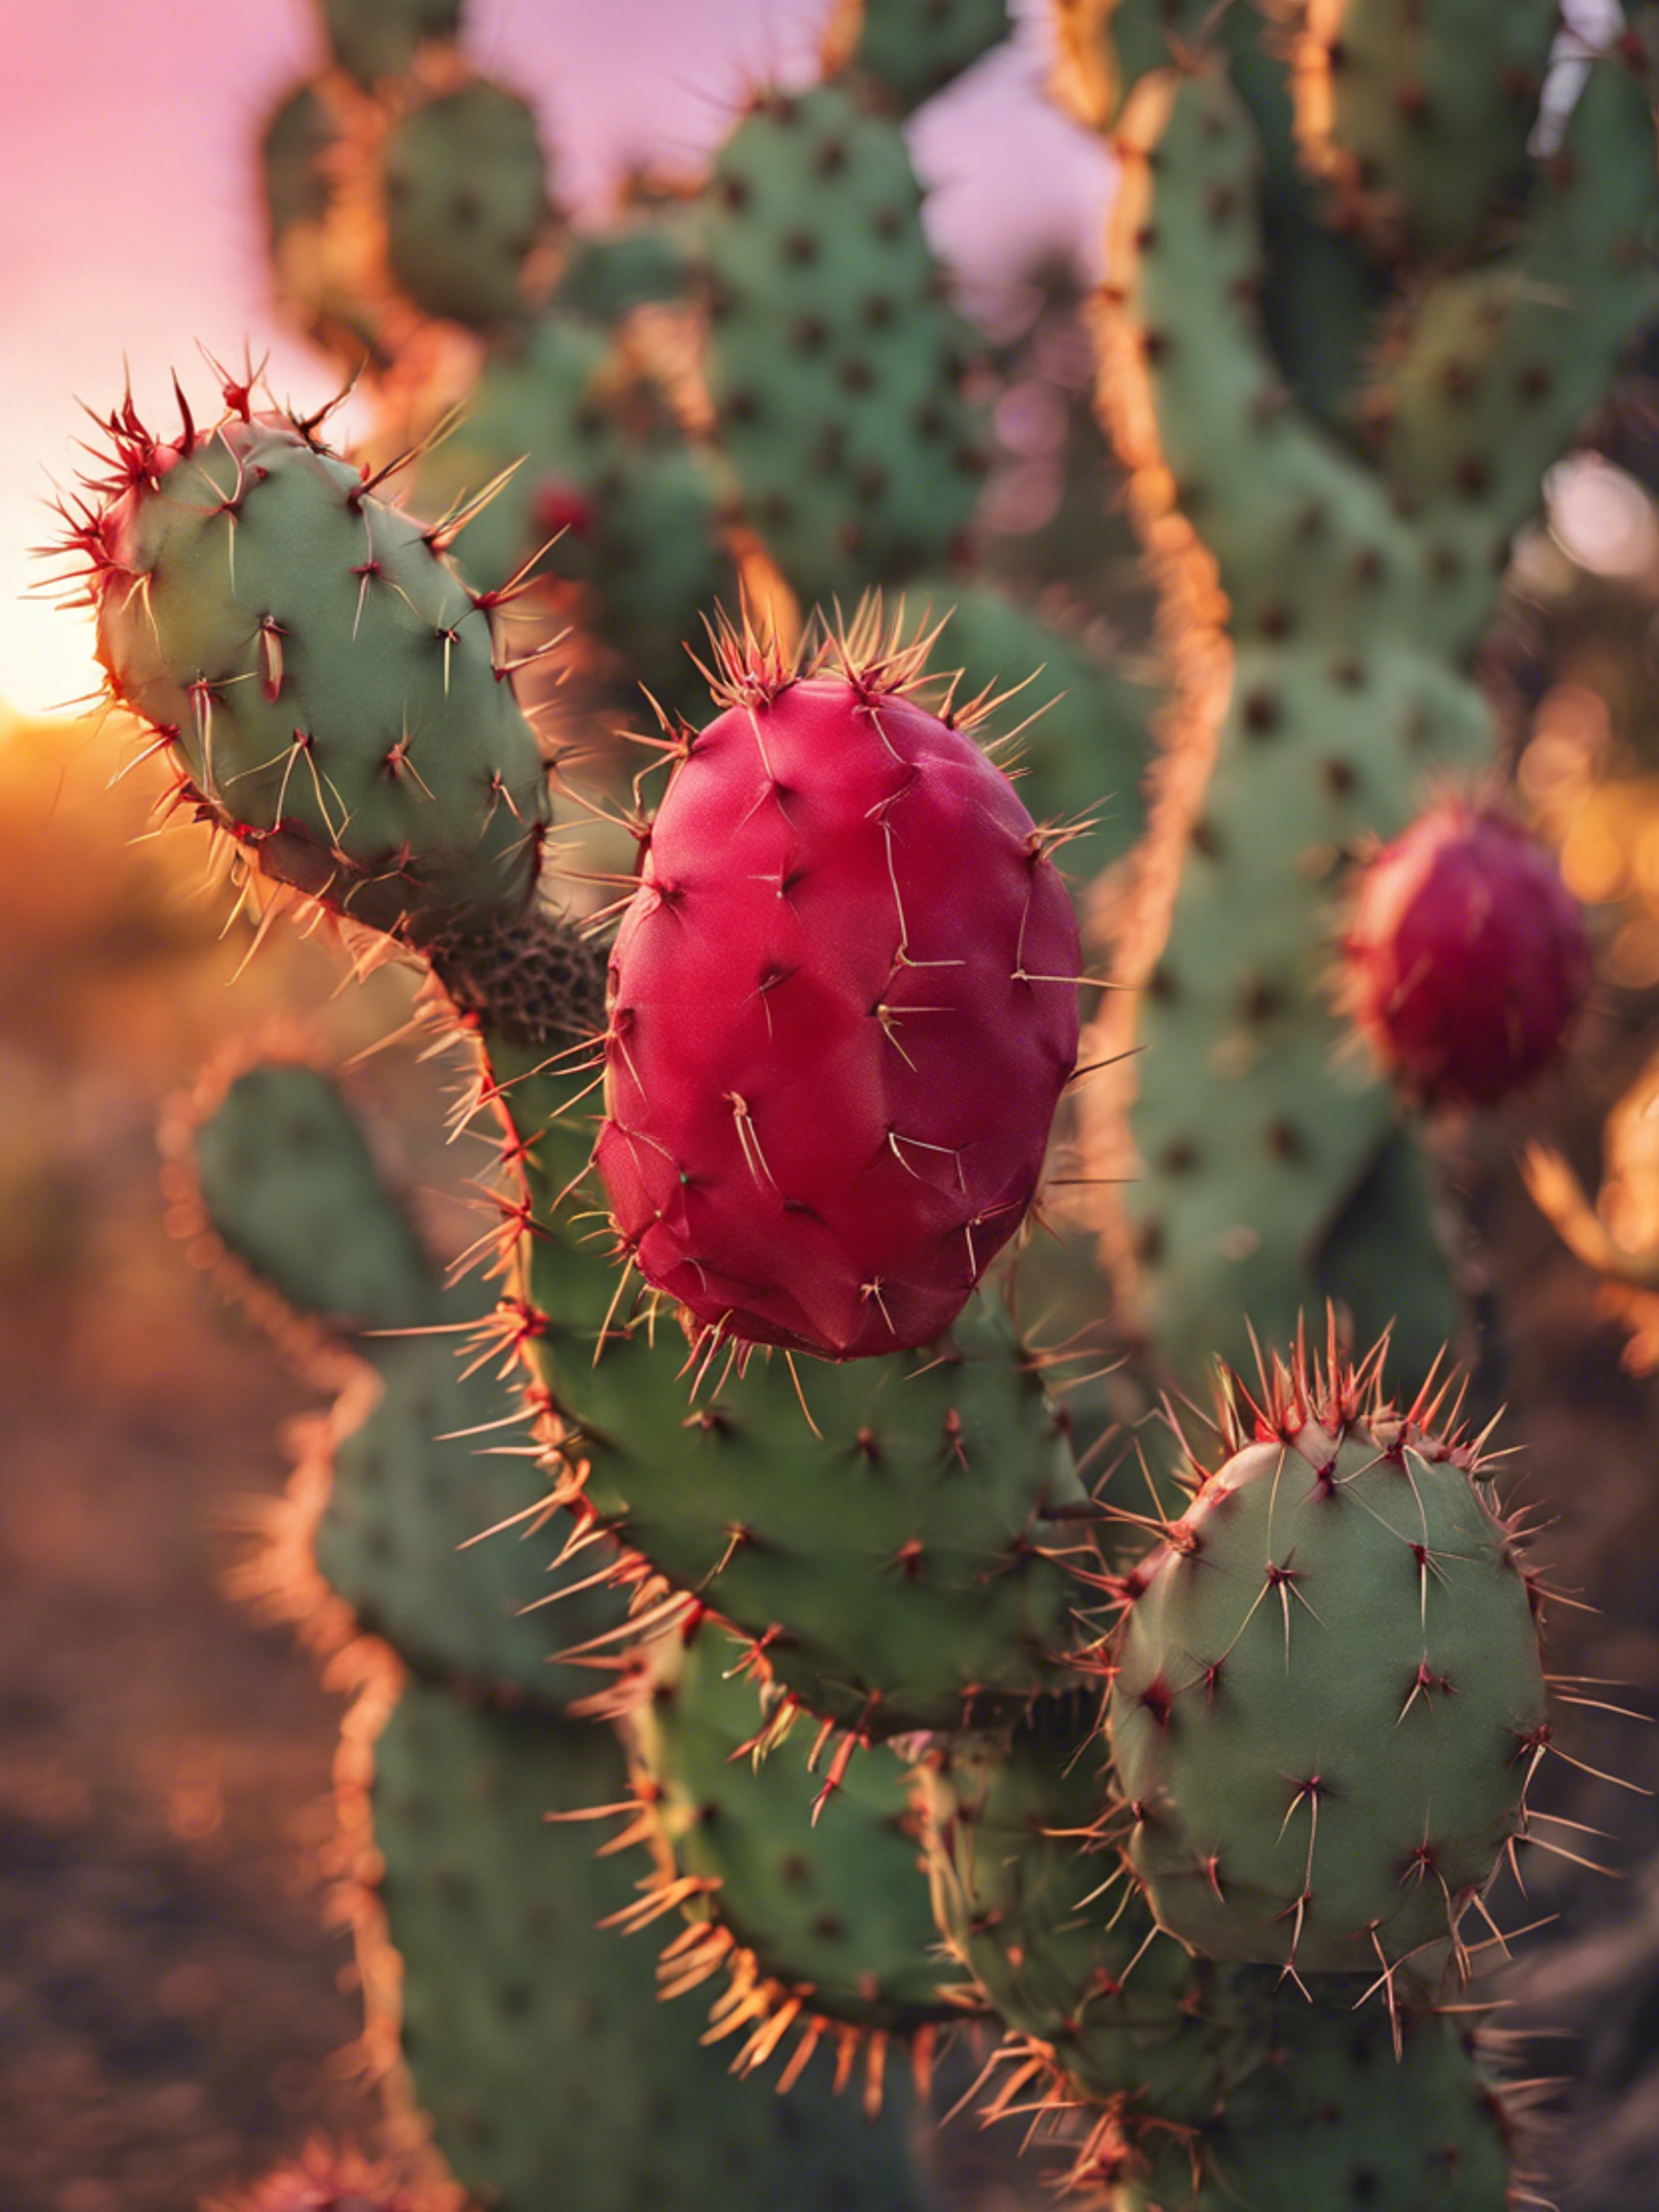 A prickly pear cactus with ripe, red fruits against a sunset background. Wallpaper[5965817ee192450fa25b]